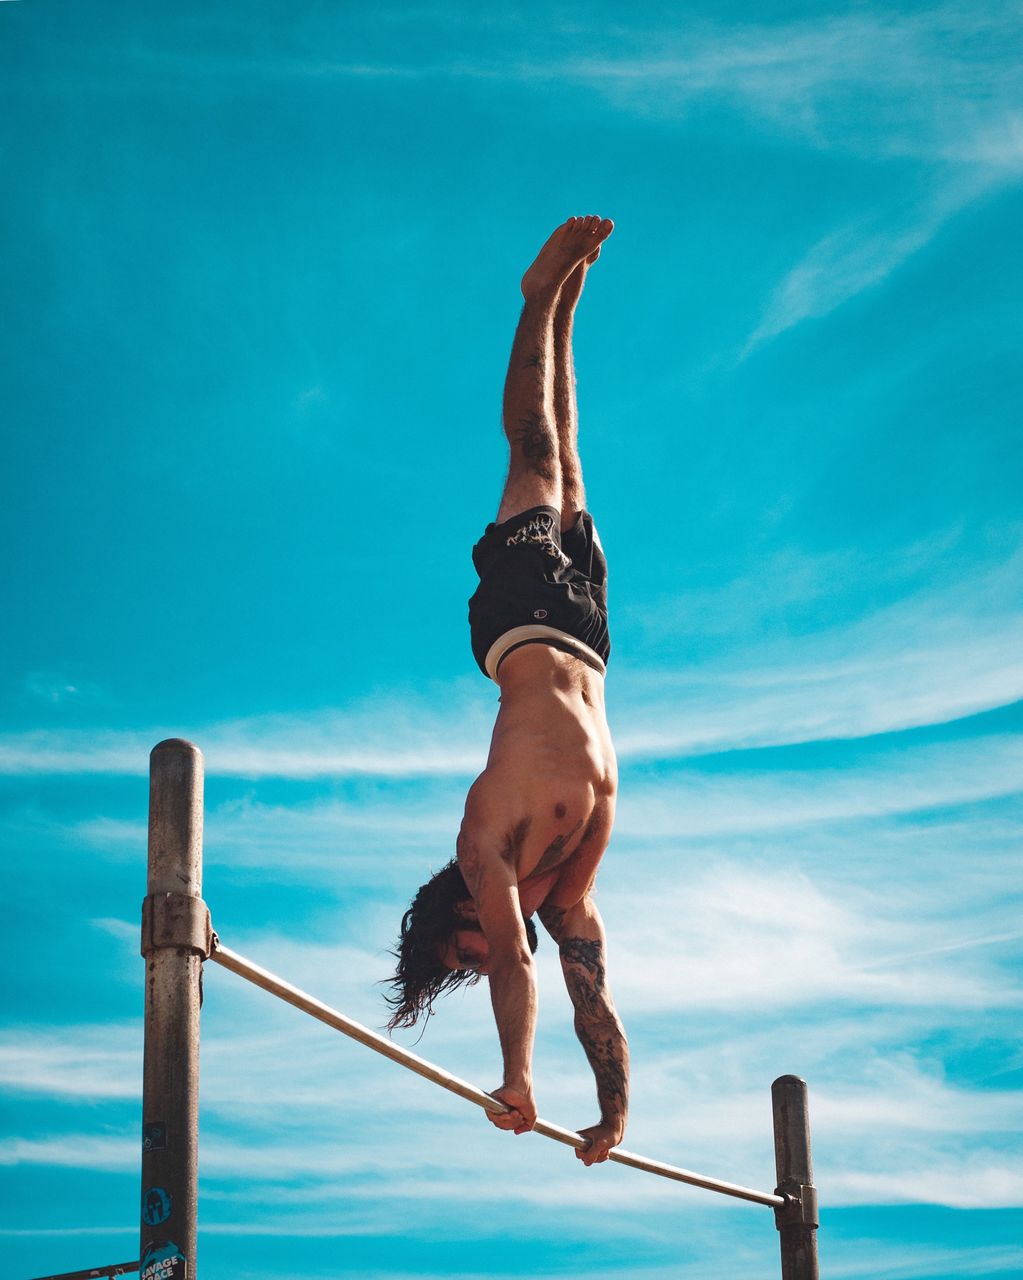 Full length of shirtless man balancing on rope against blue sky